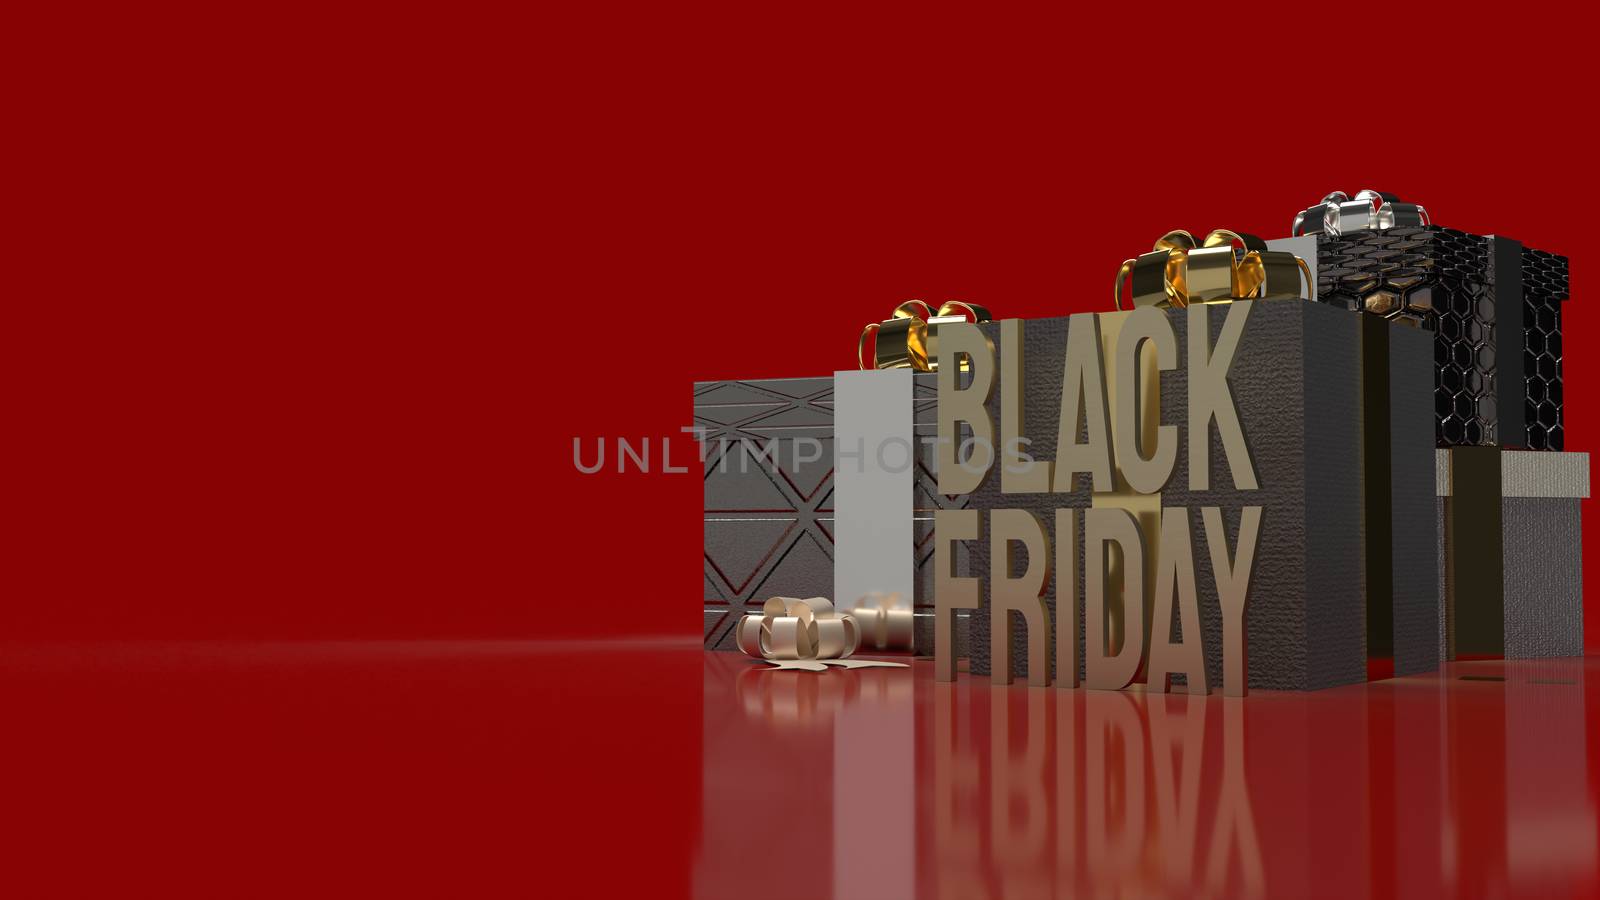 The Black Friday gold text and gift boxes on red background for  by Niphon_13